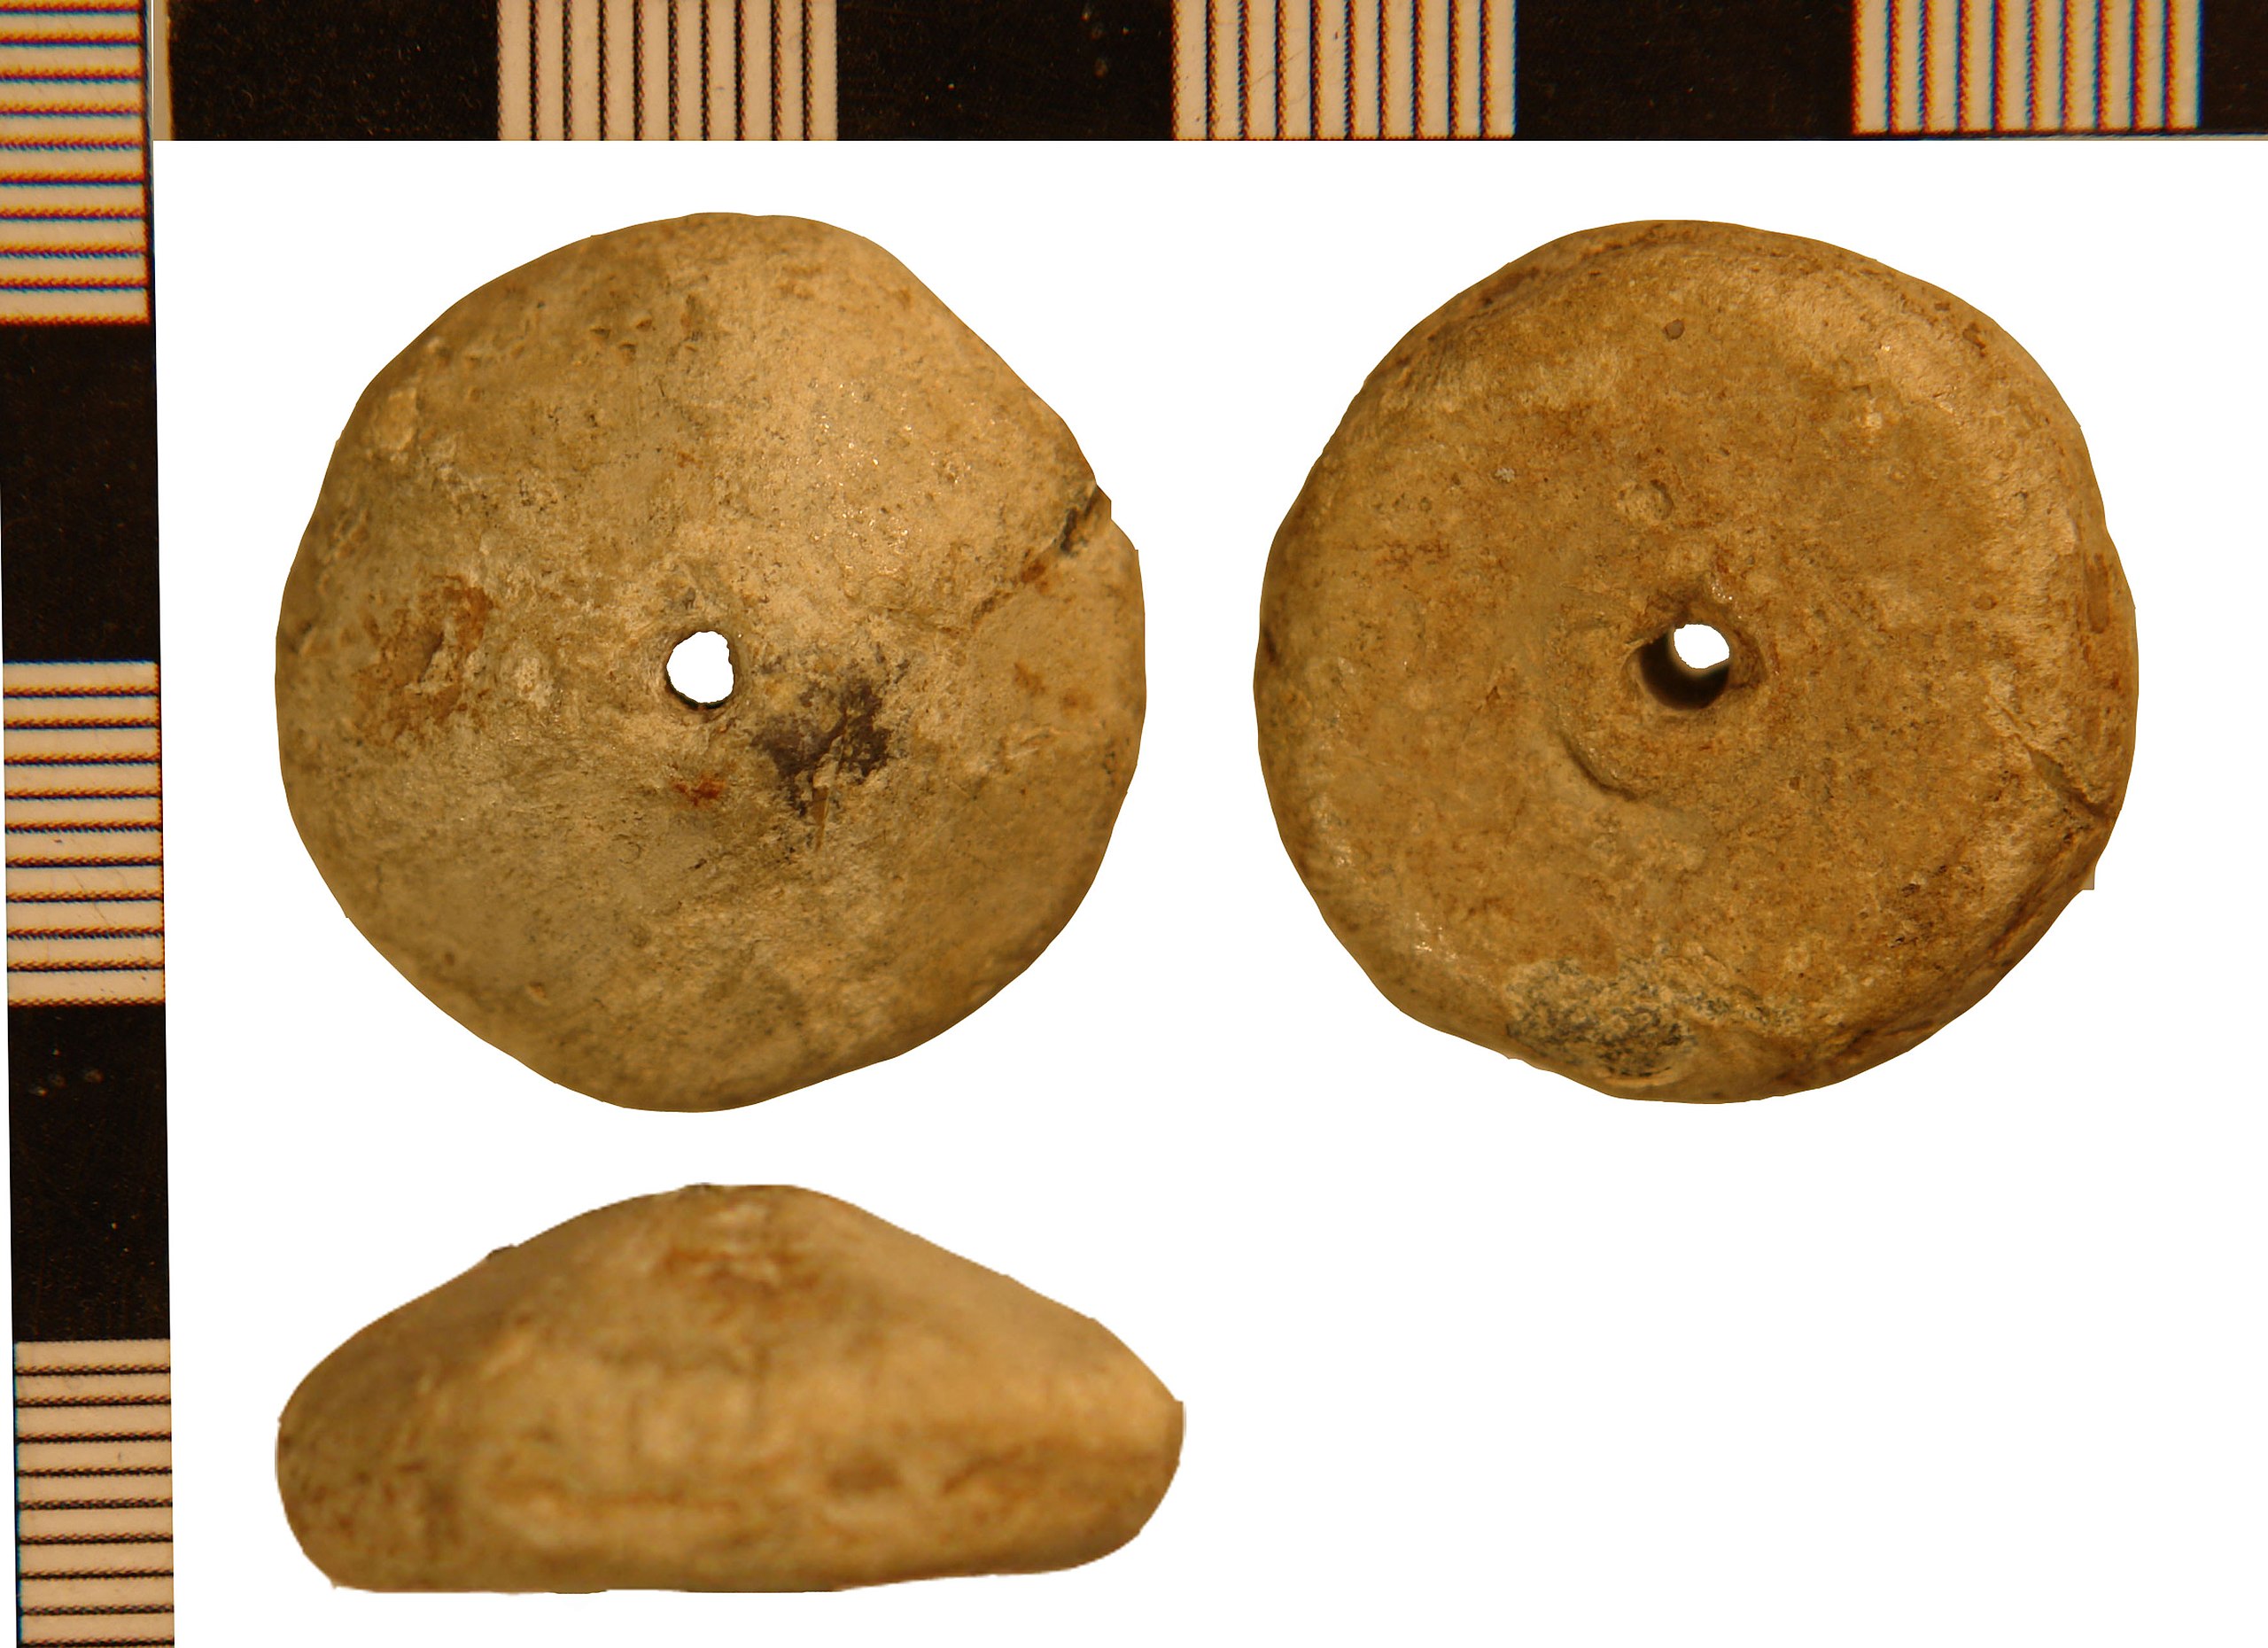 File:A, Early Medieval Weight (FindID 616566).jpg - Wikimedia Commons